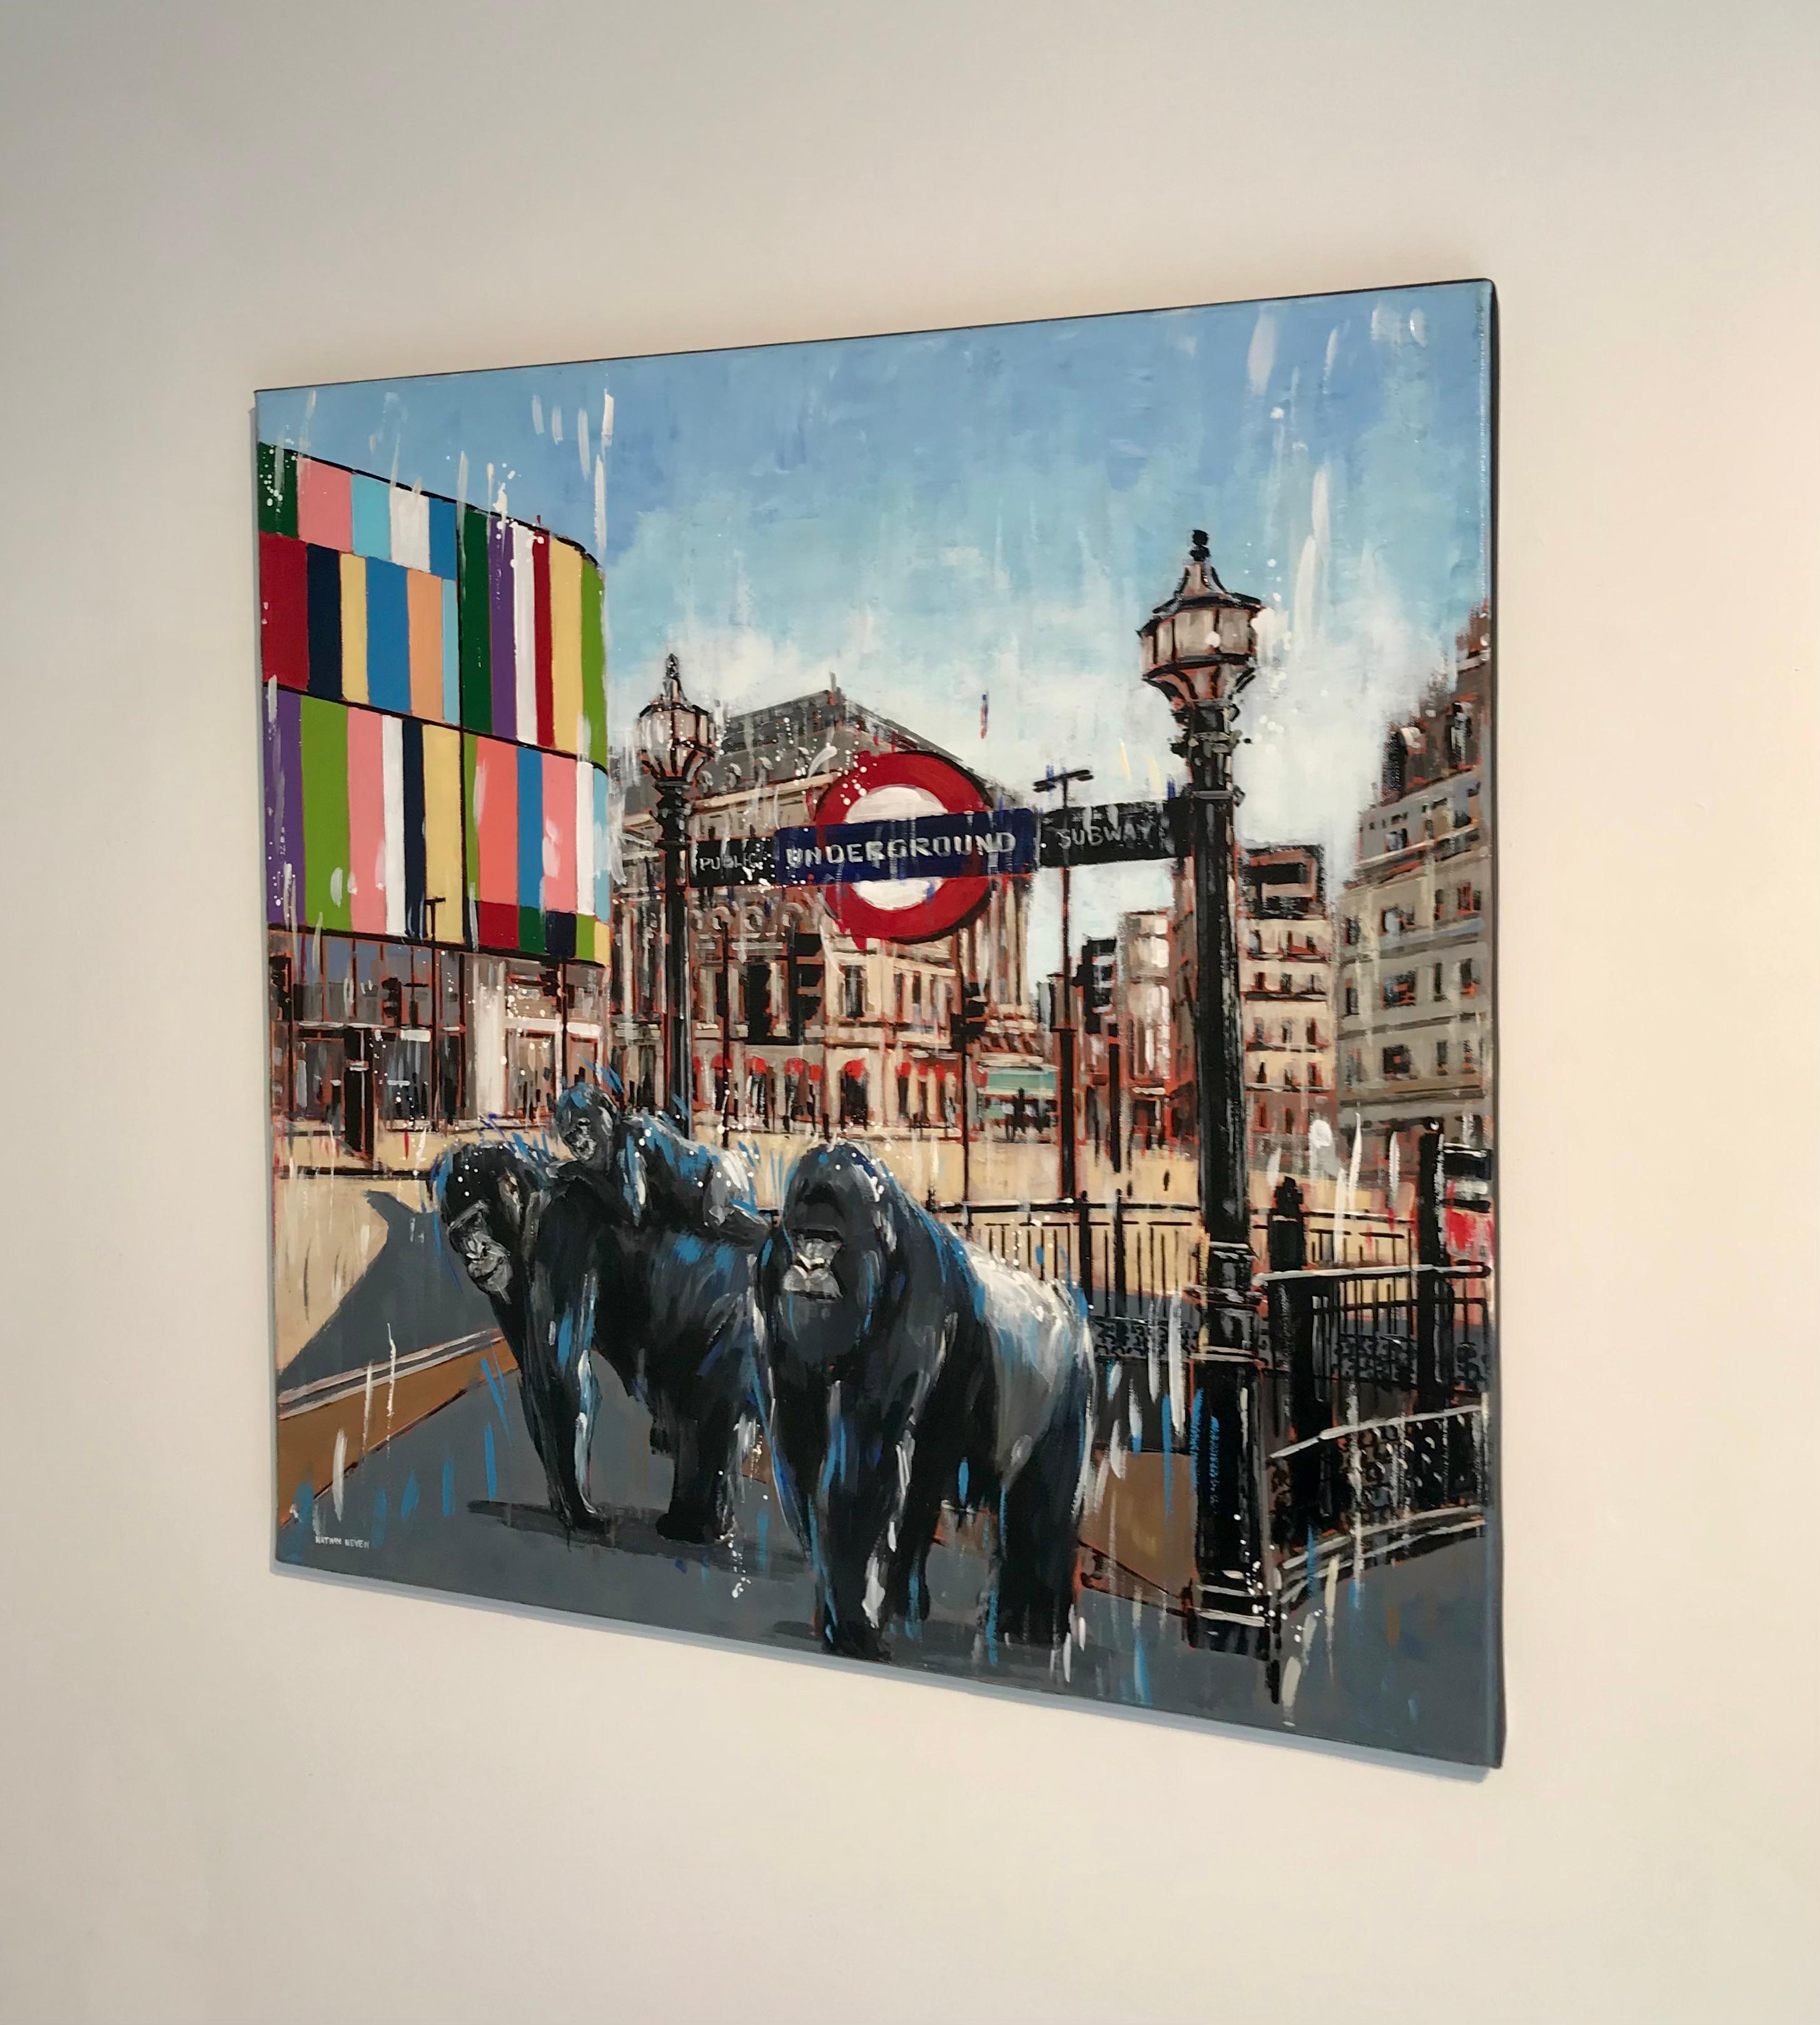 Family Day Off - London modern cityscape wildlife surreal abstract oil painting  - Surrealist Painting by Nathan Neven